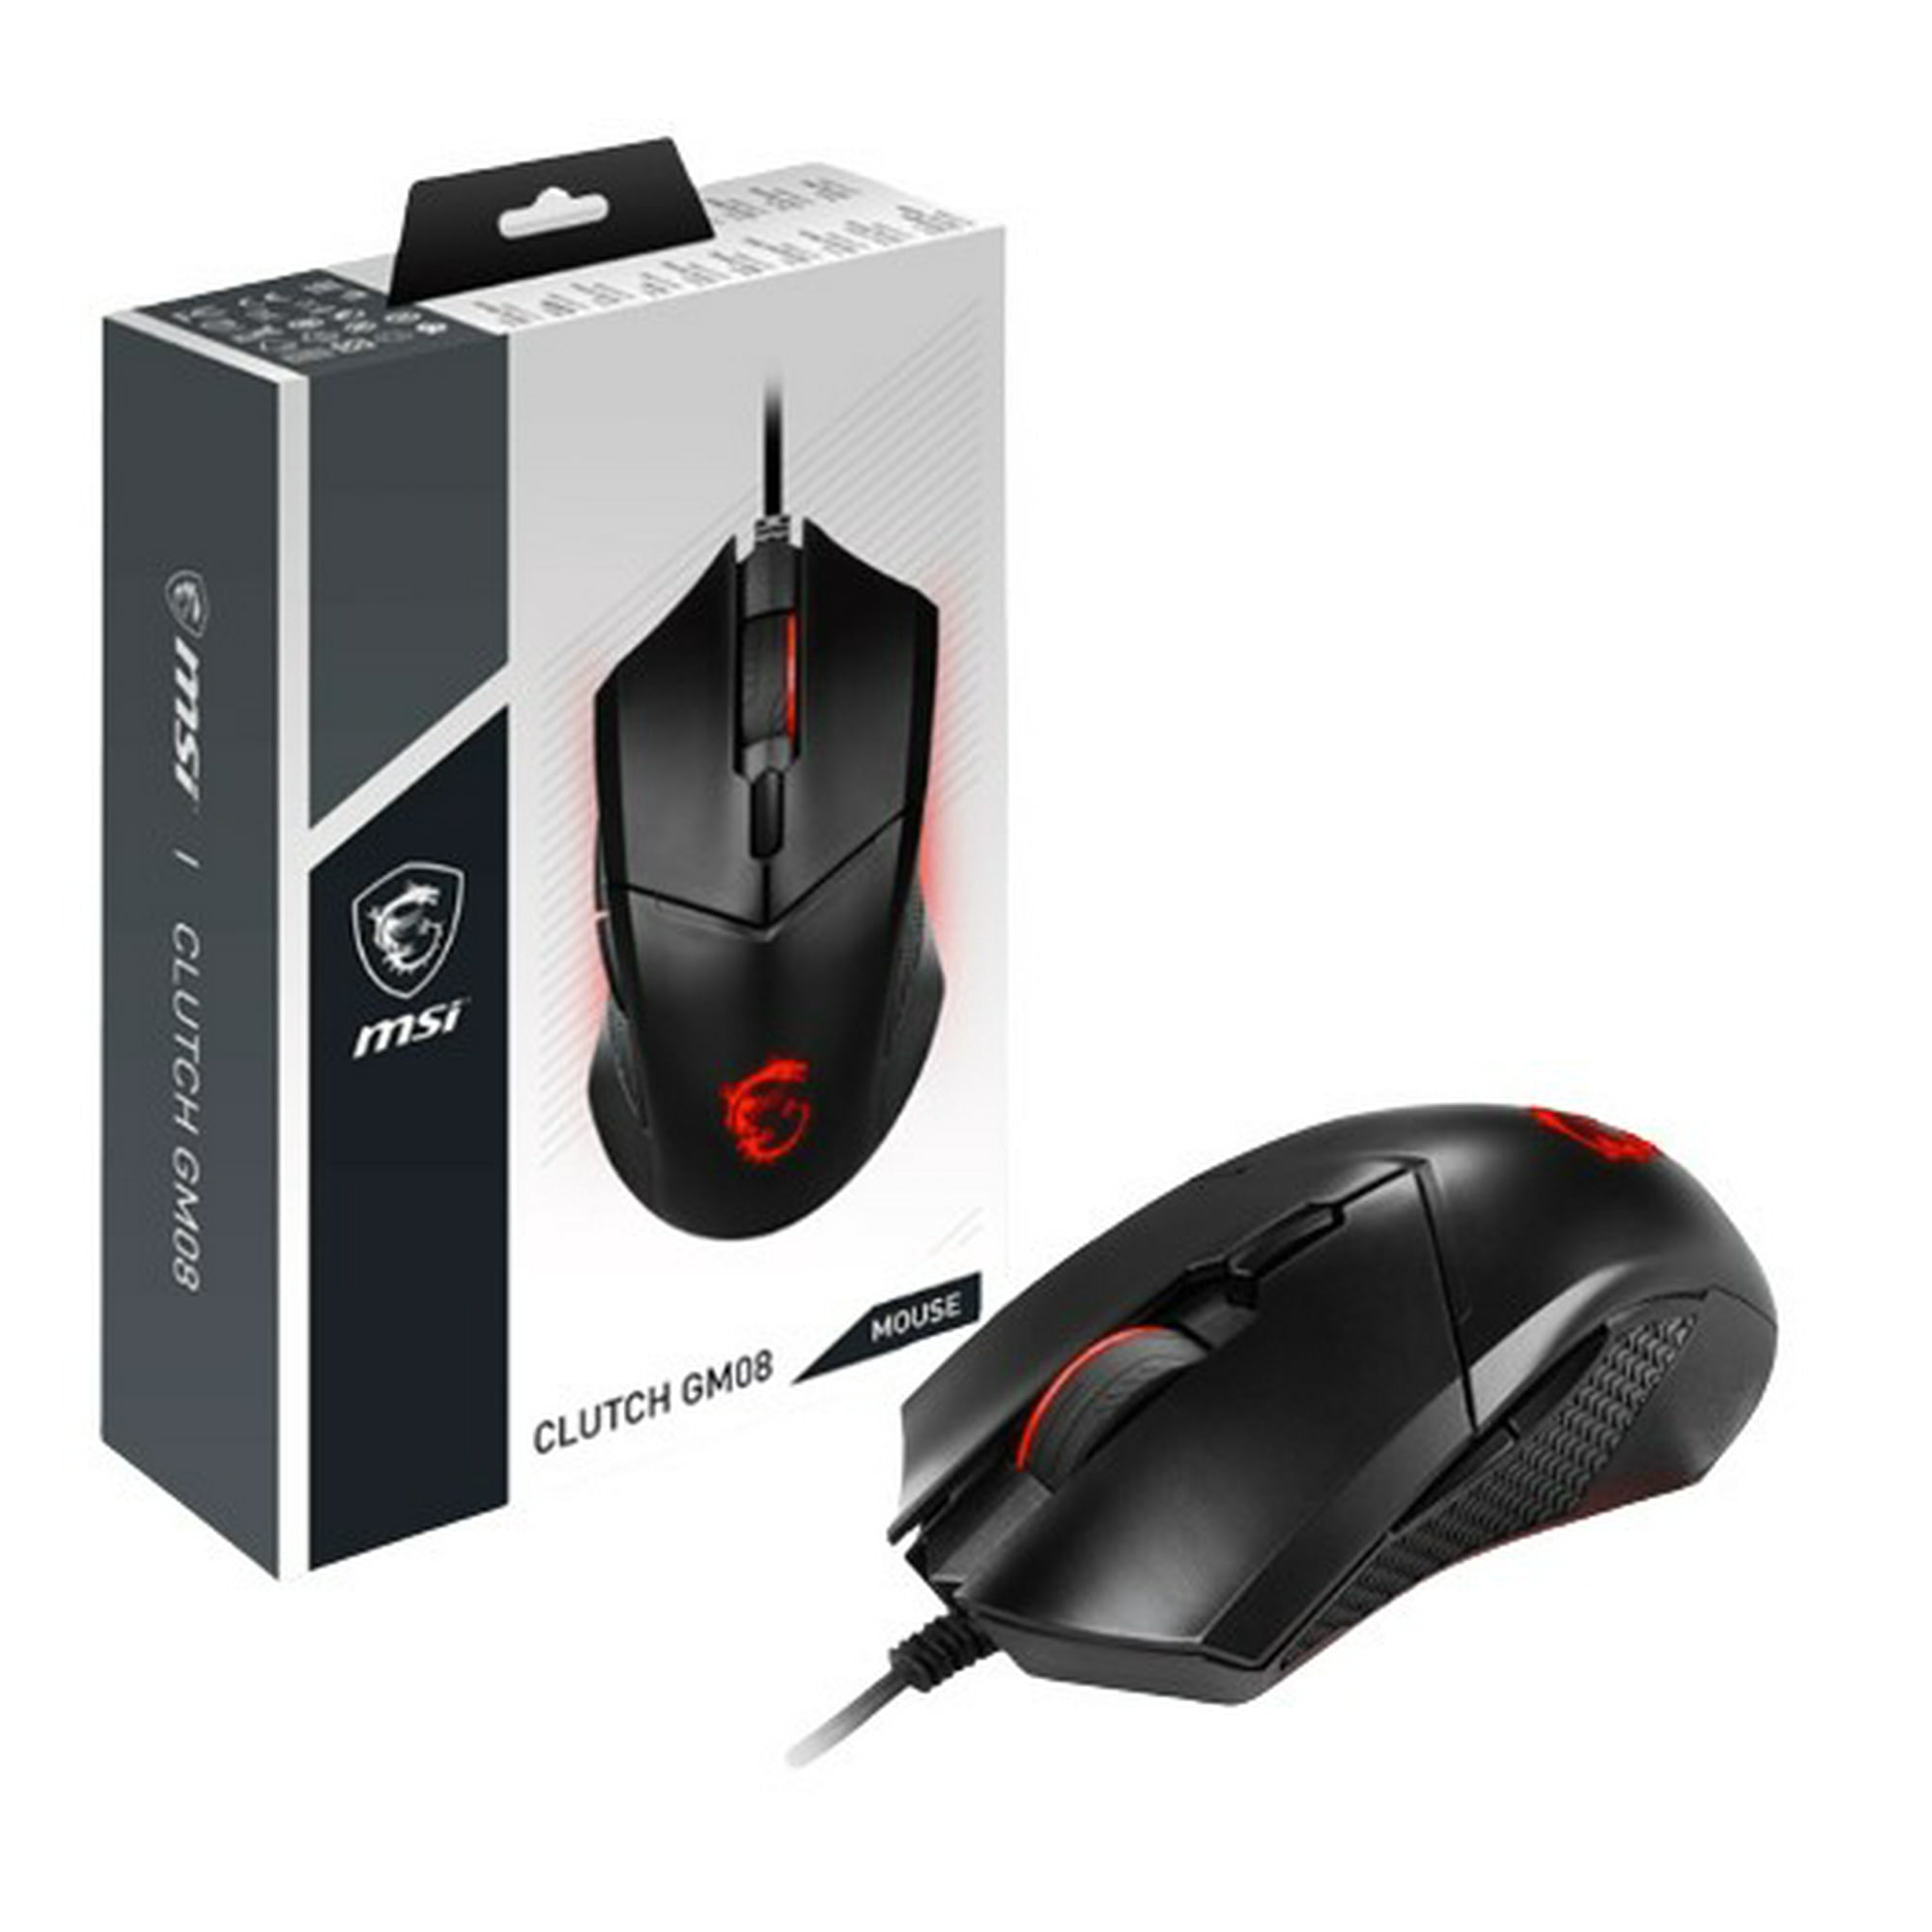 Mouse Gaming Clutch Gm08 Usb